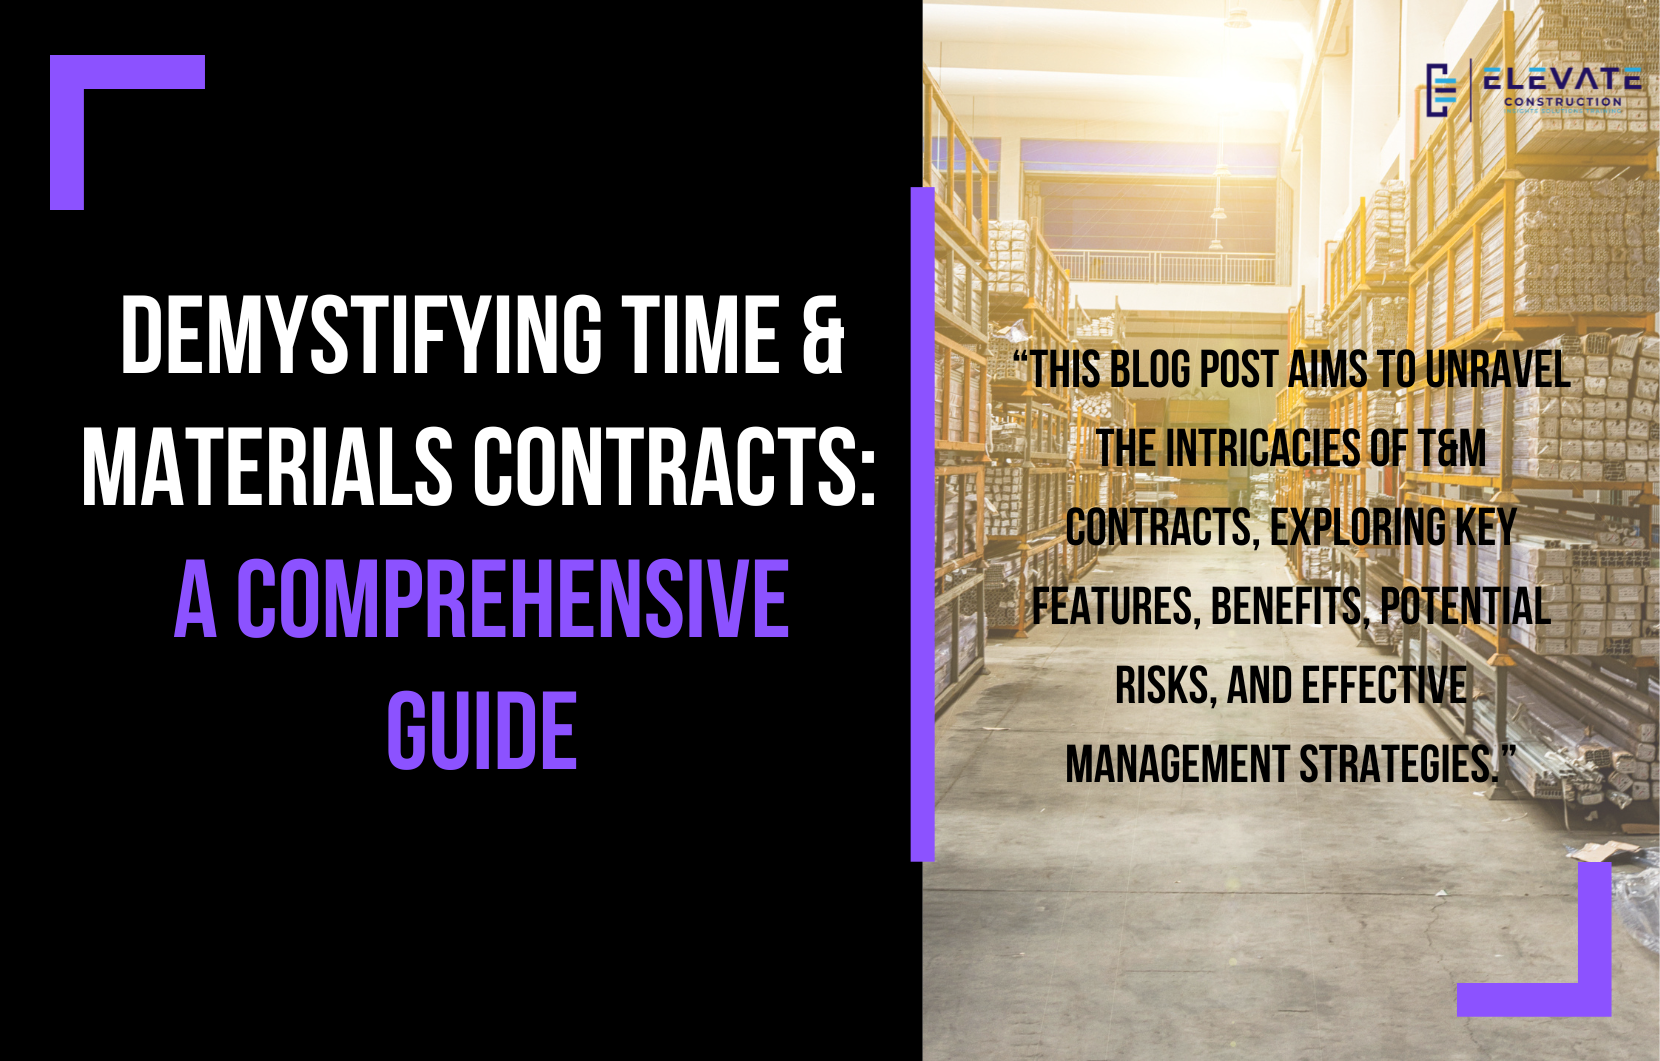 Demystifying Time & Materials Contracts: A Comprehensive Guide